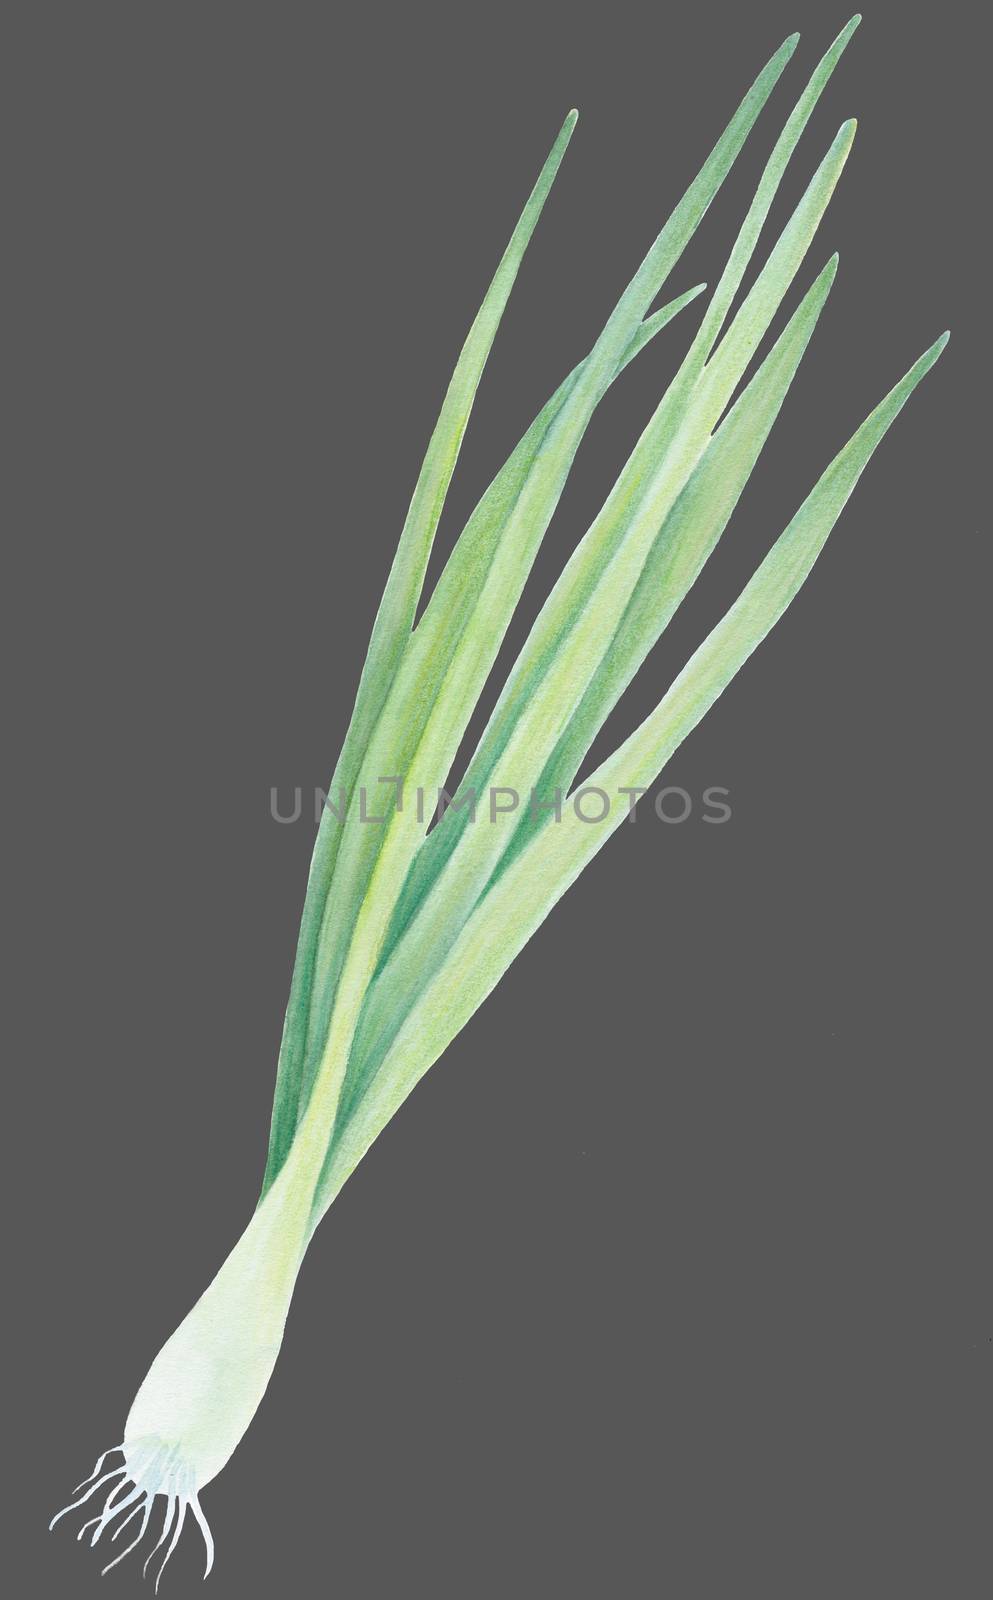 Fresh Spring Green onion isolated on grey background. Watercolour realistic botanical art. Hand drawn illustration. For logo, packaging, print, organic food, market store market, diet menu.